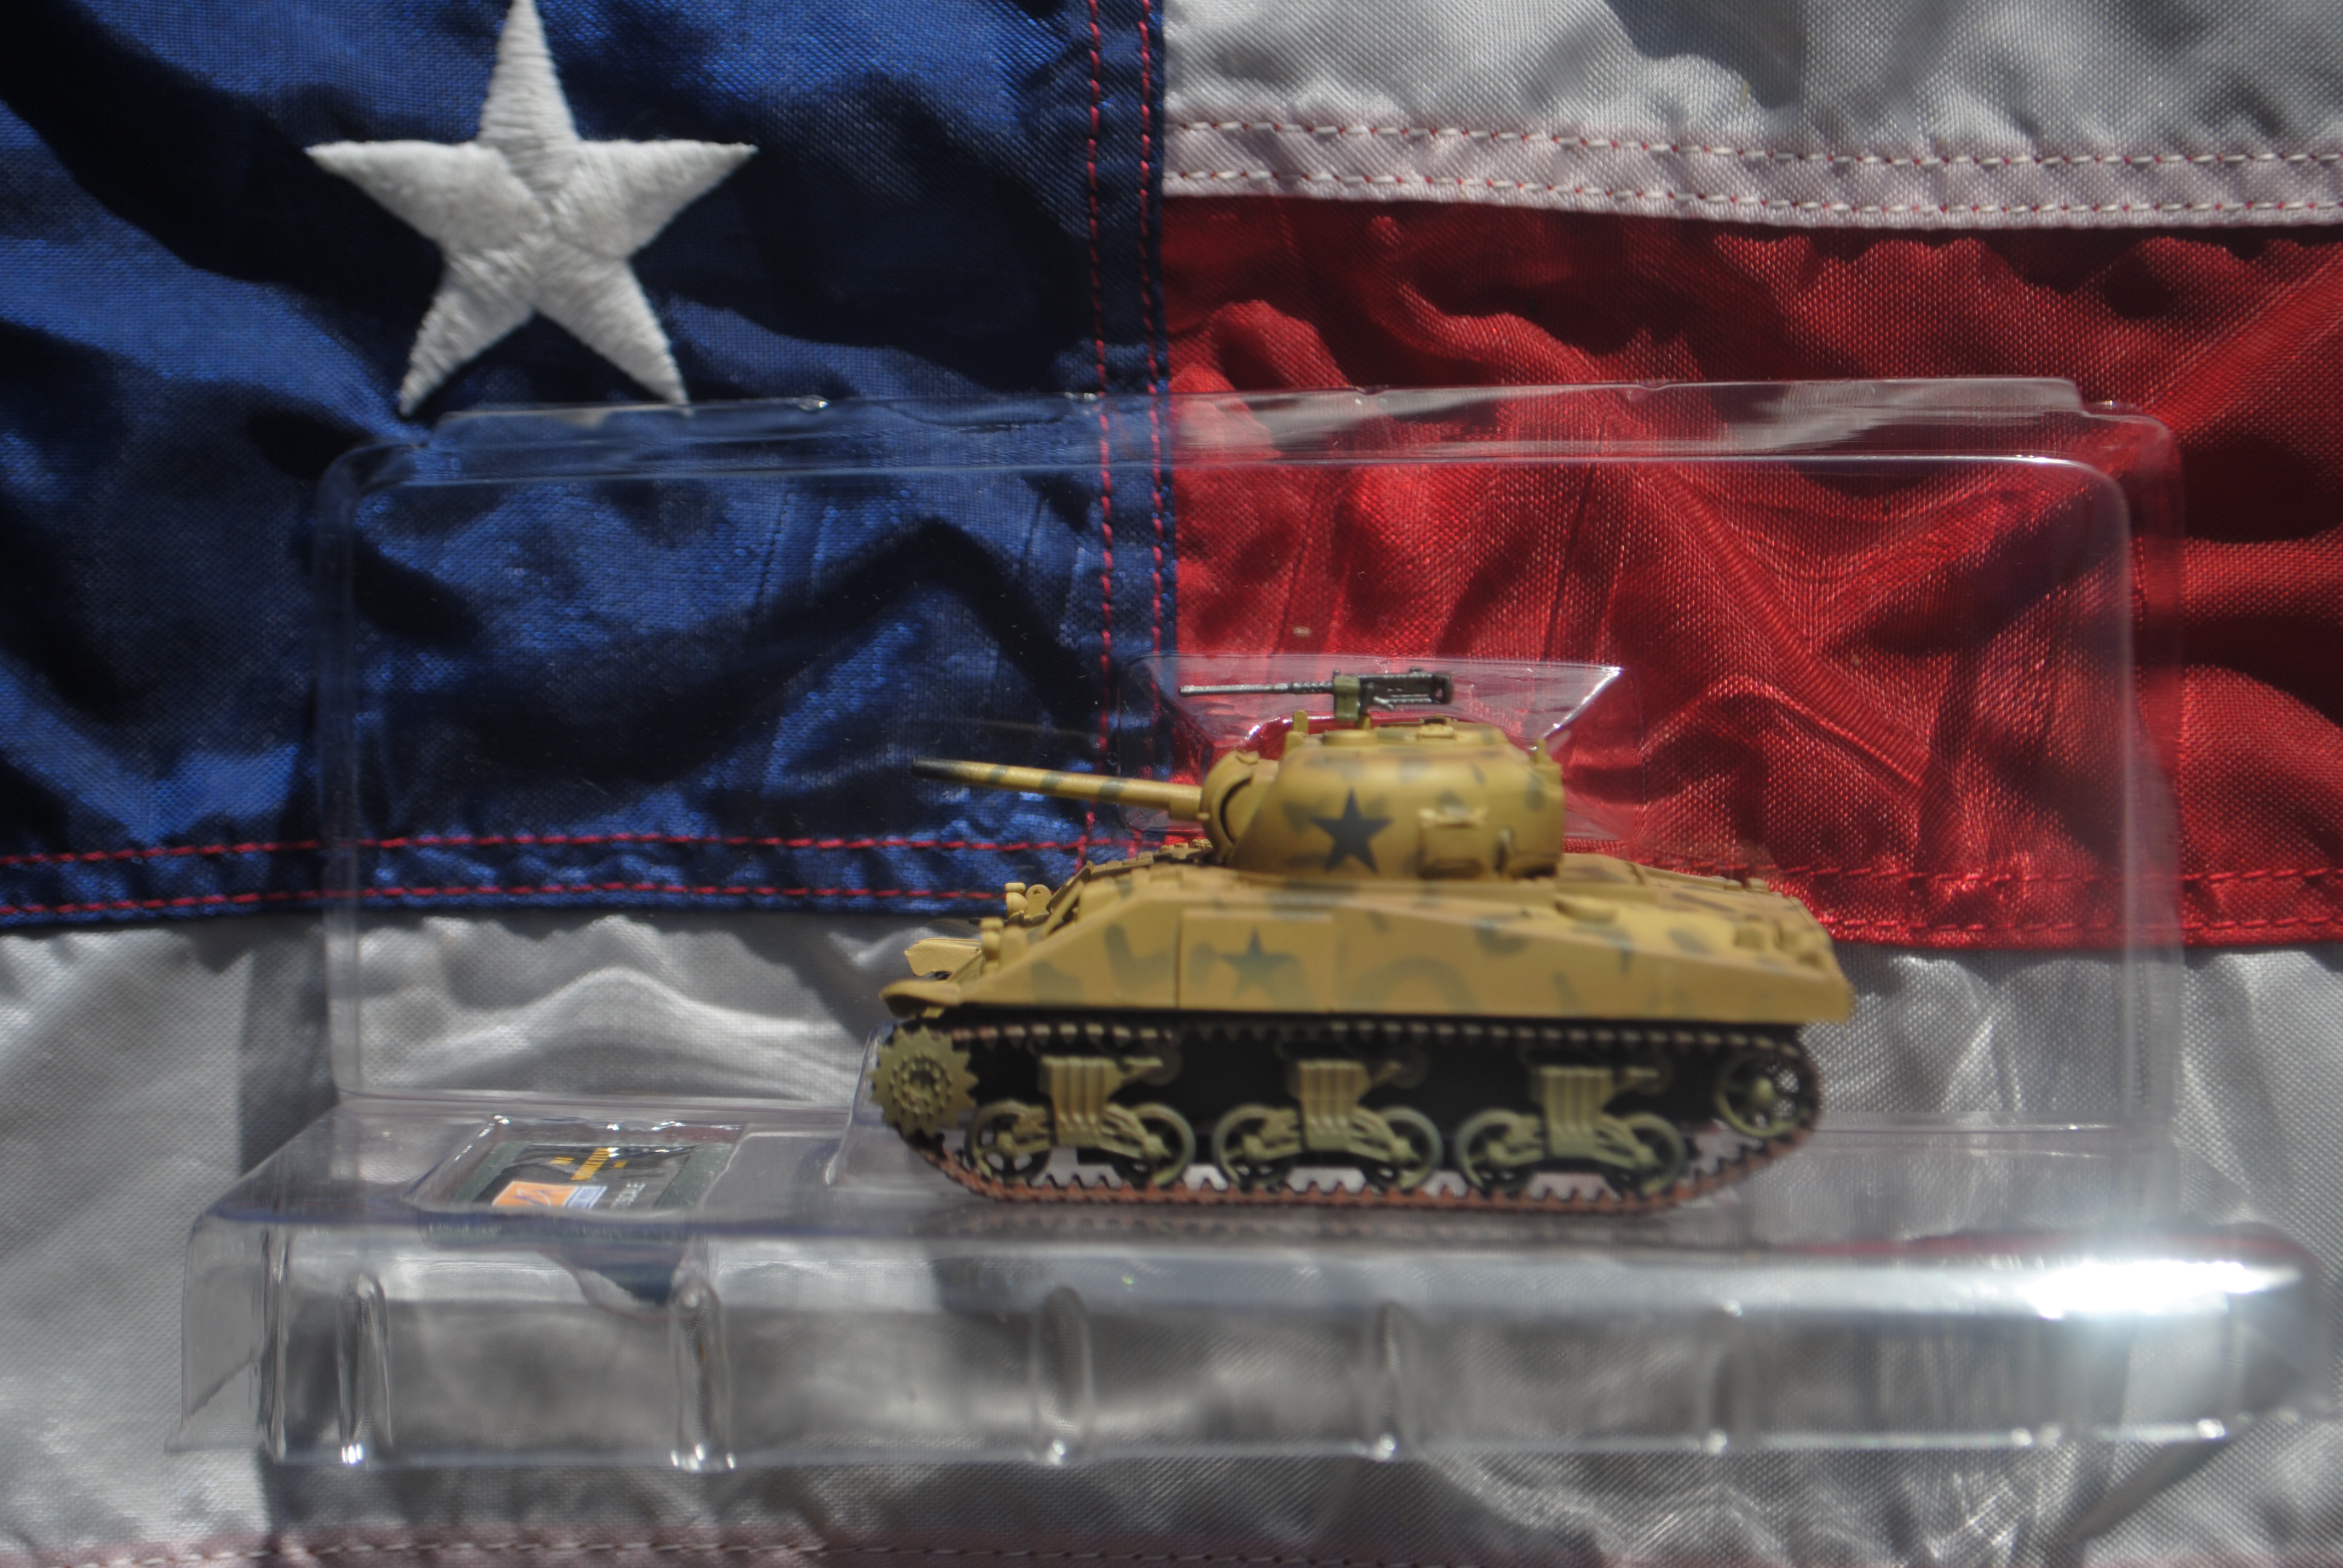 Easy Model 36253 Sherman M4 Middle Tank, U.S. Army, 4th Armoured Division